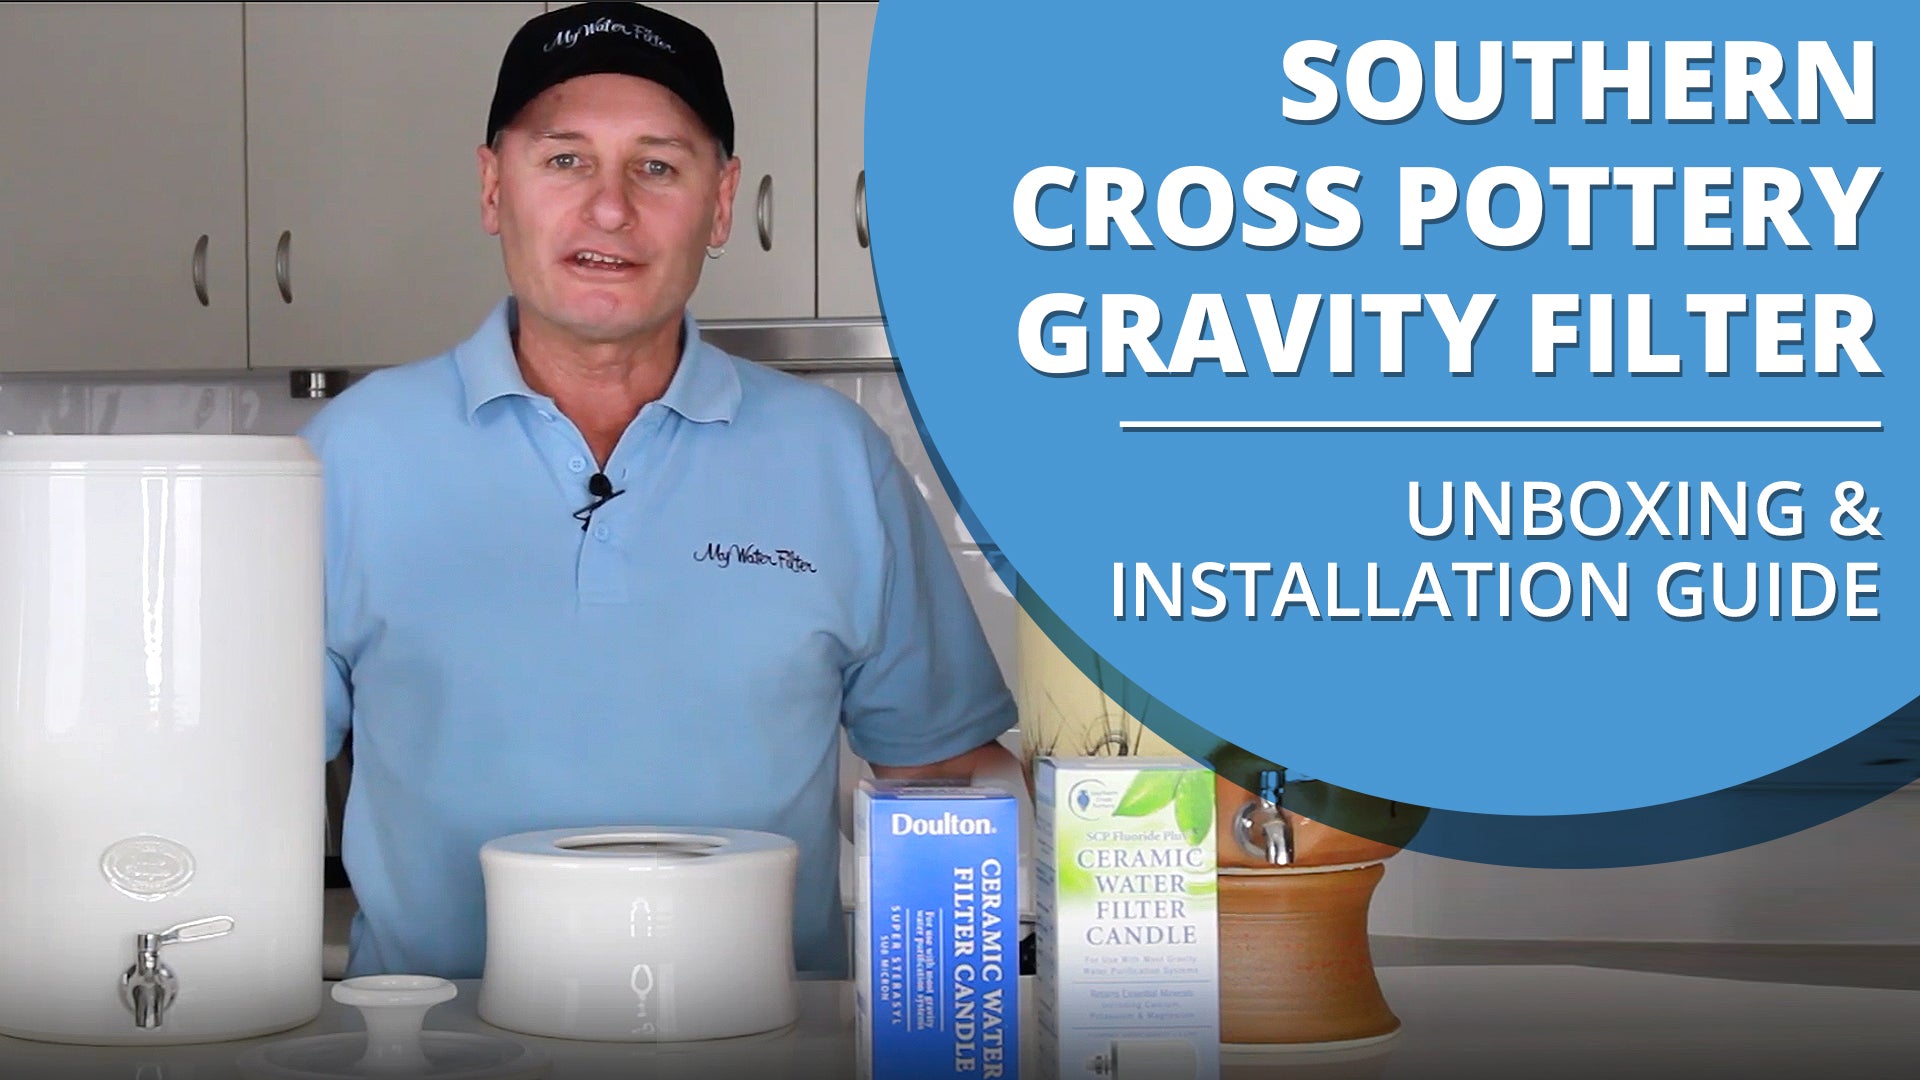 [VIDEO] Southern Cross Pottery Gravity Fed Ceramic Stoneware Water Filters - Unboxing & Installation Video